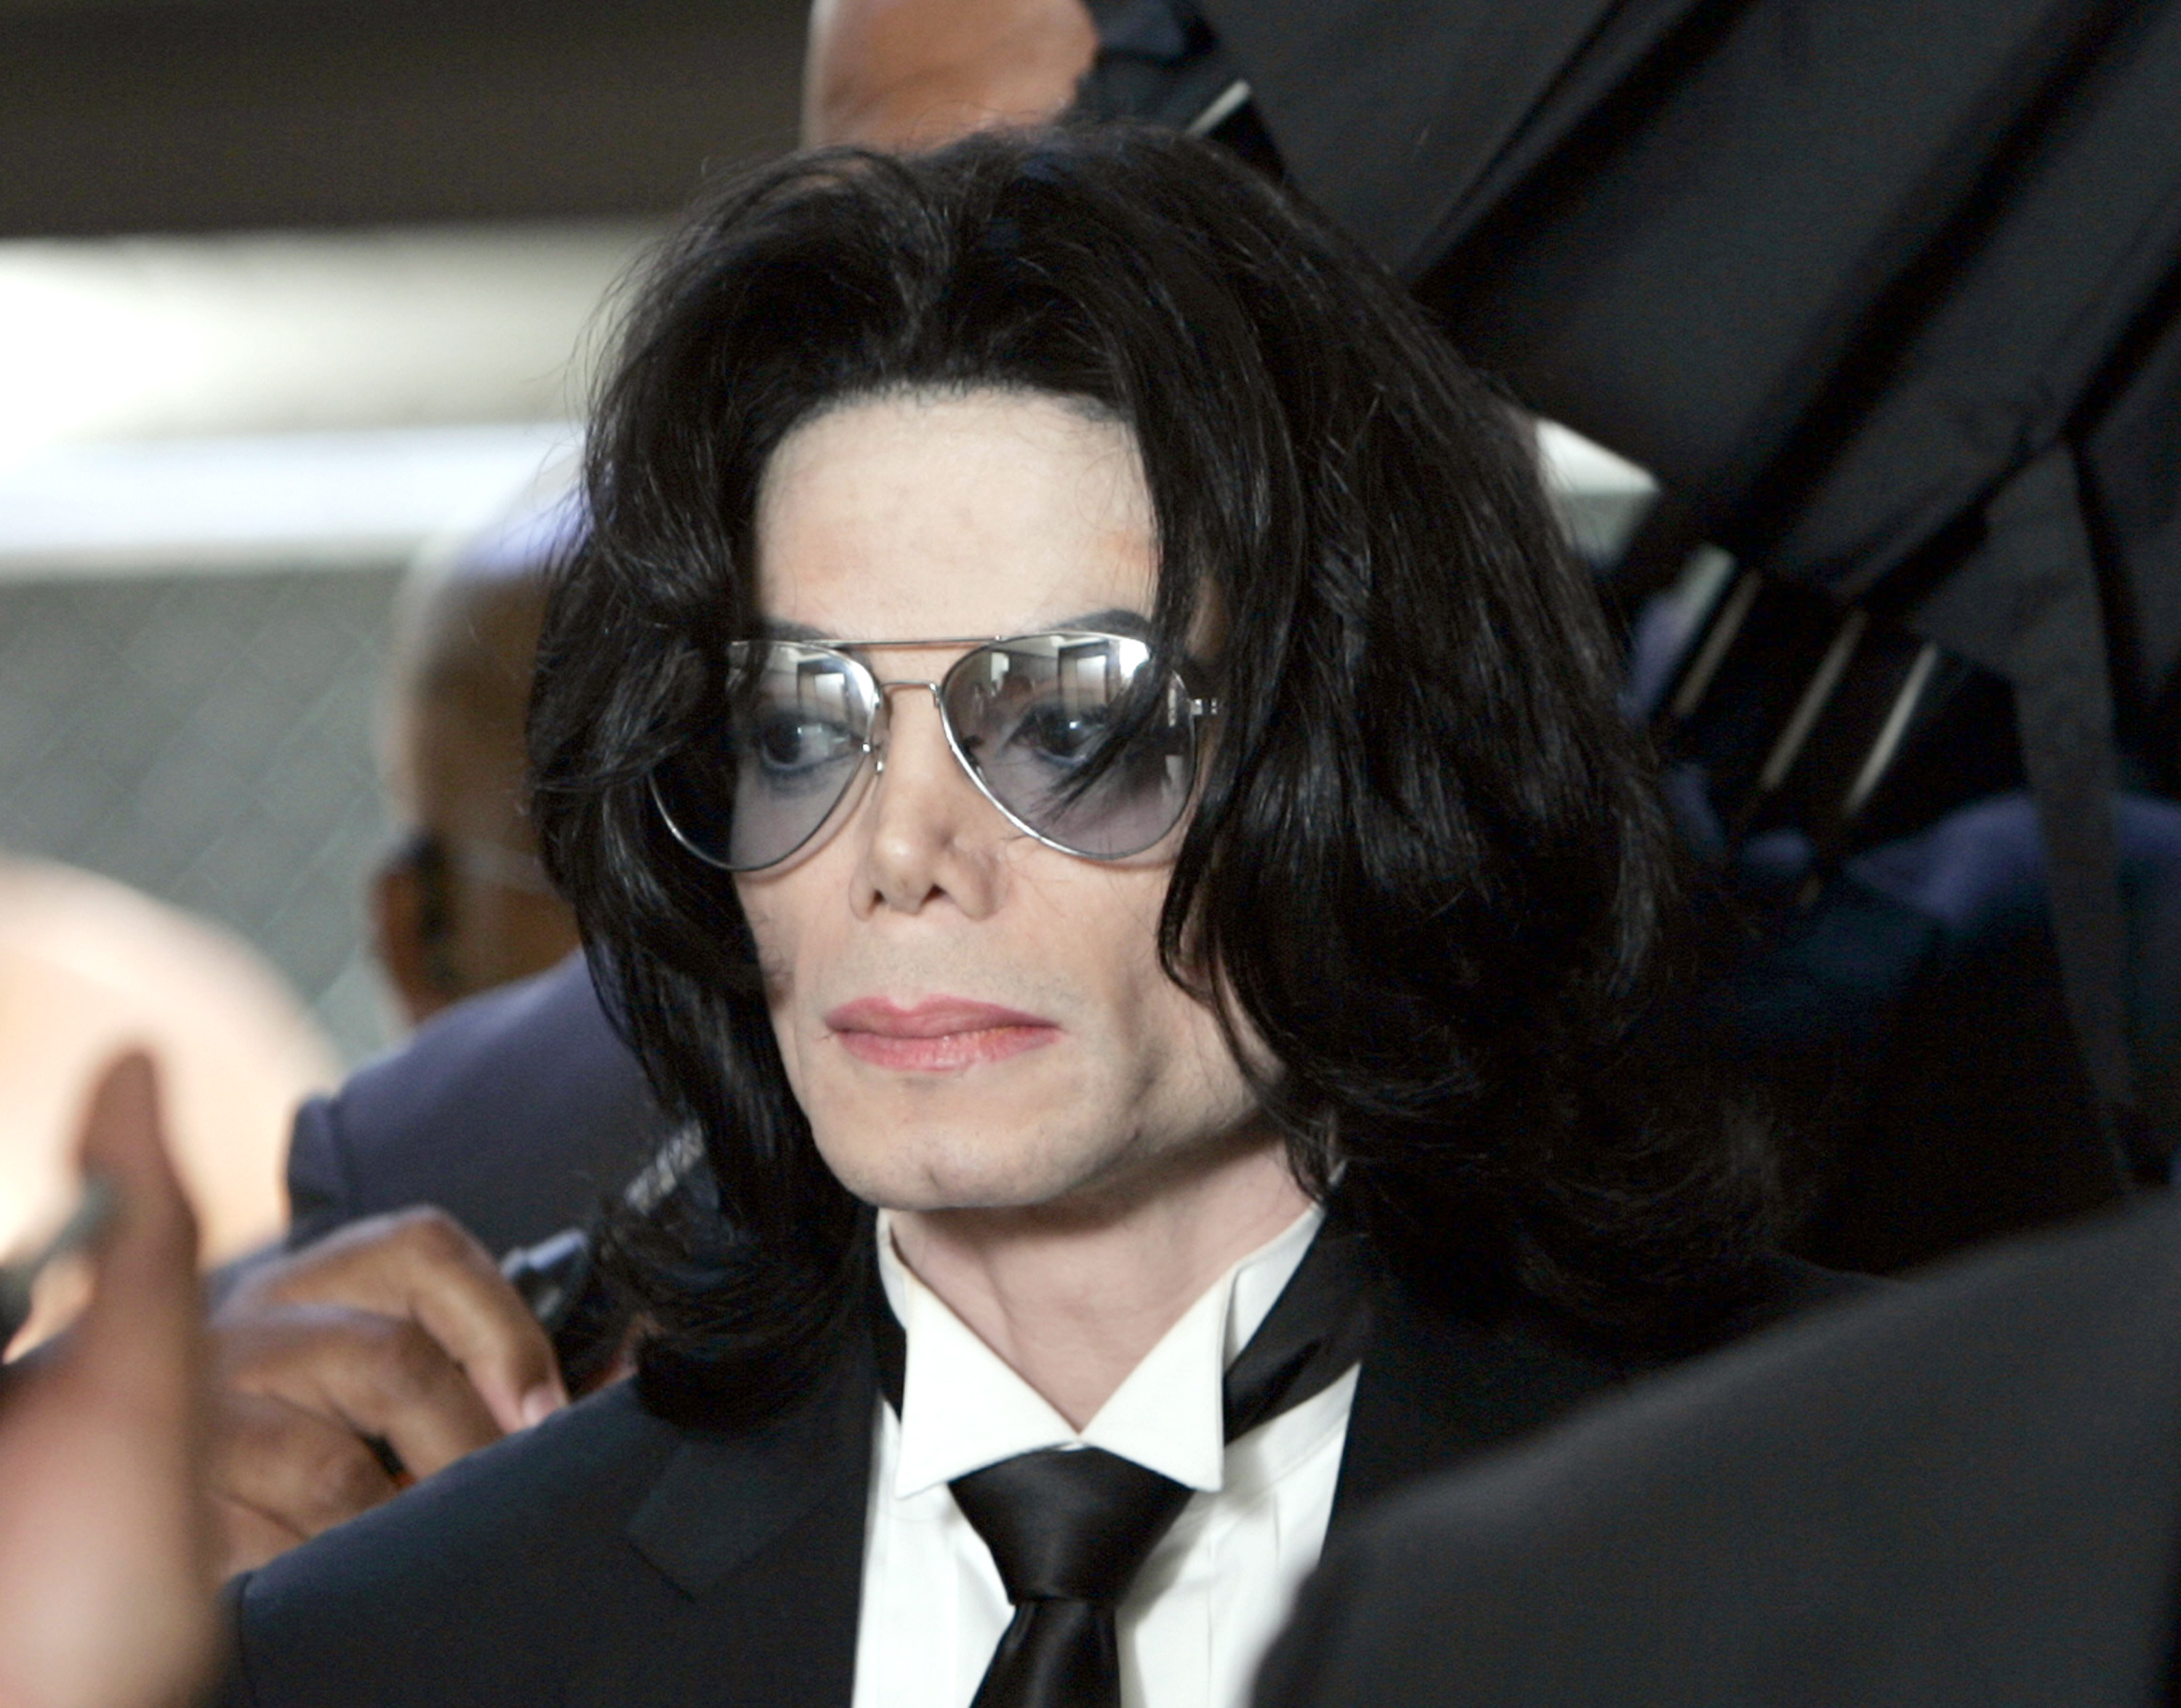 Michael Jackson white skin mystery kept fans captivated during his lifetime.